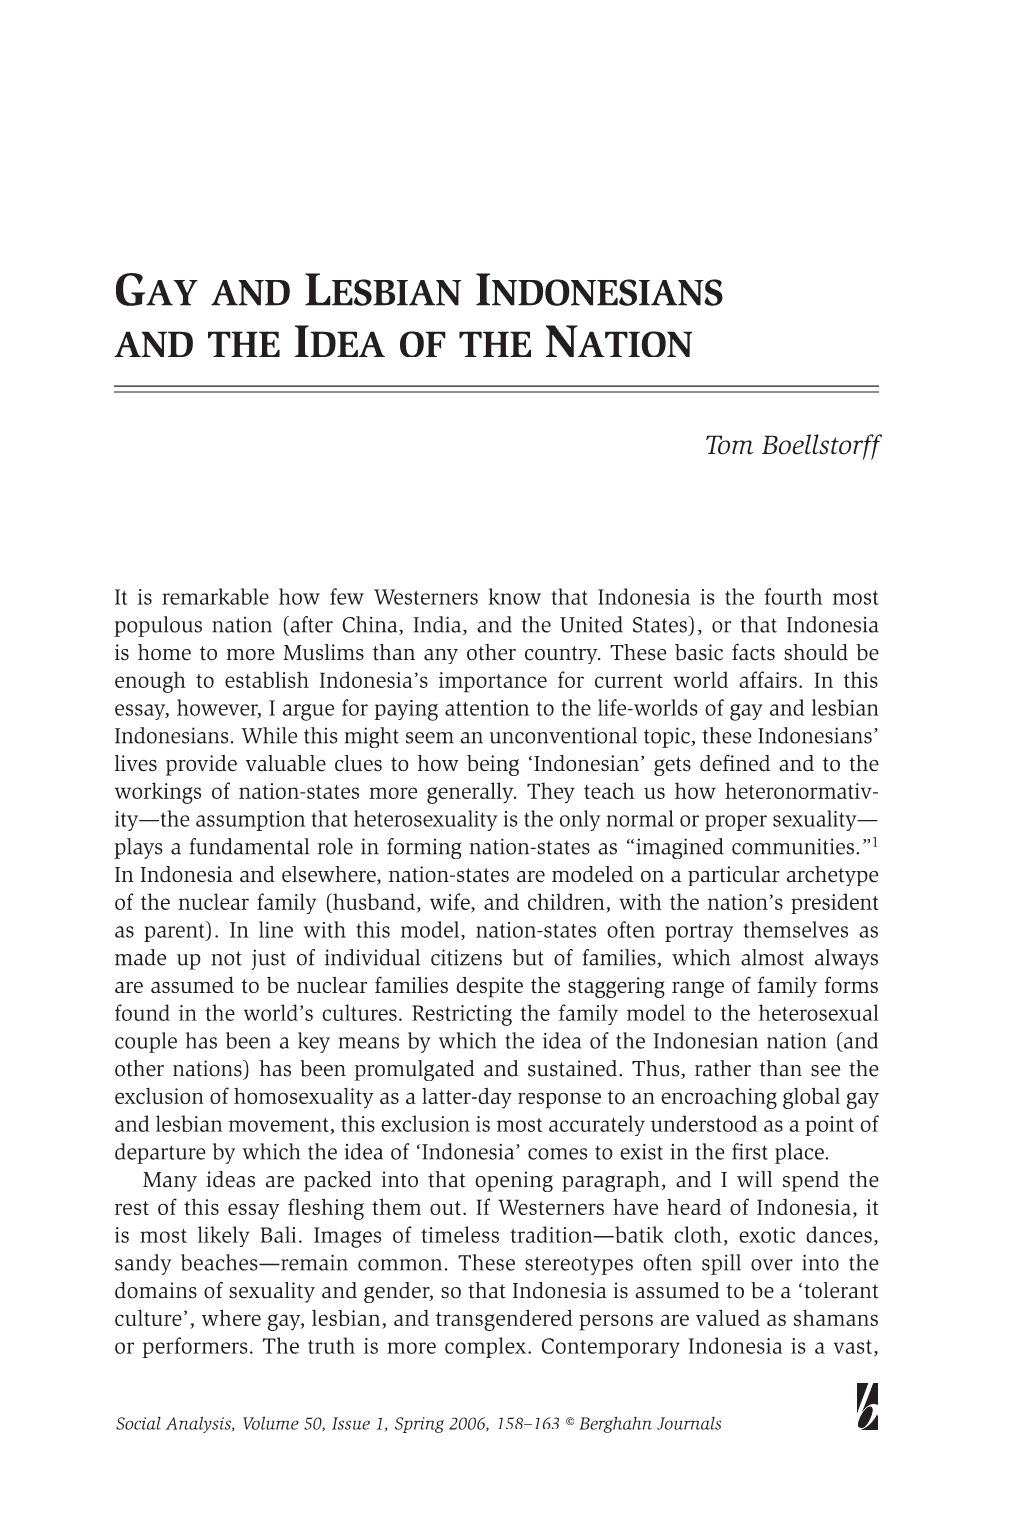 Gay and Lesbian Indonesians and the Idea of the Nation